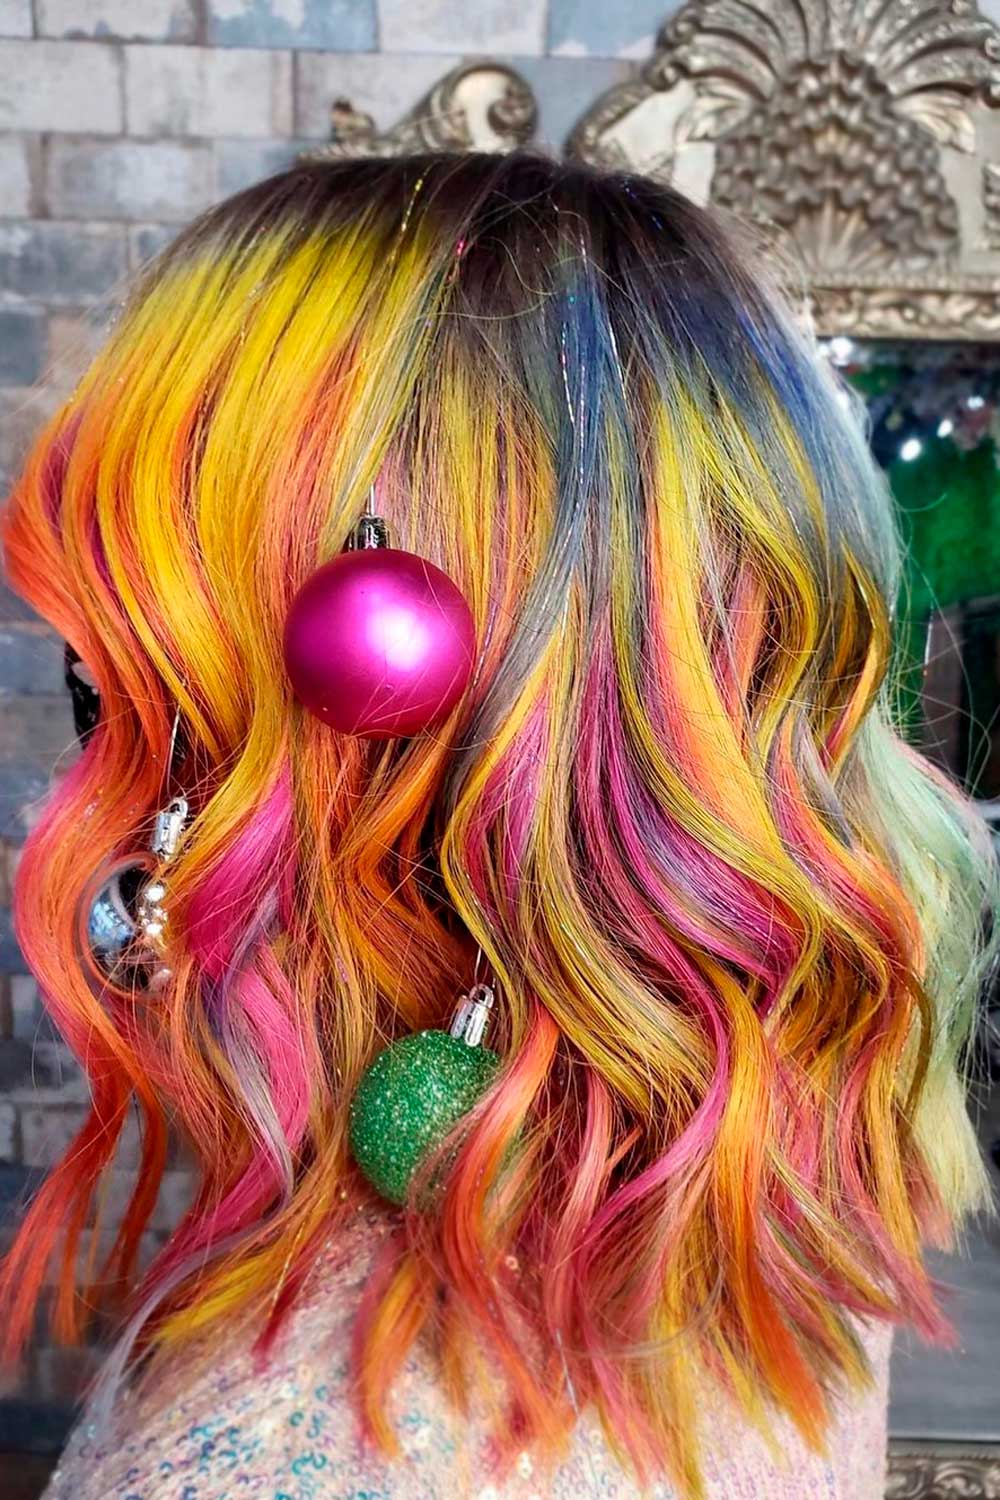 Bauble Hair Accessories for Christmas